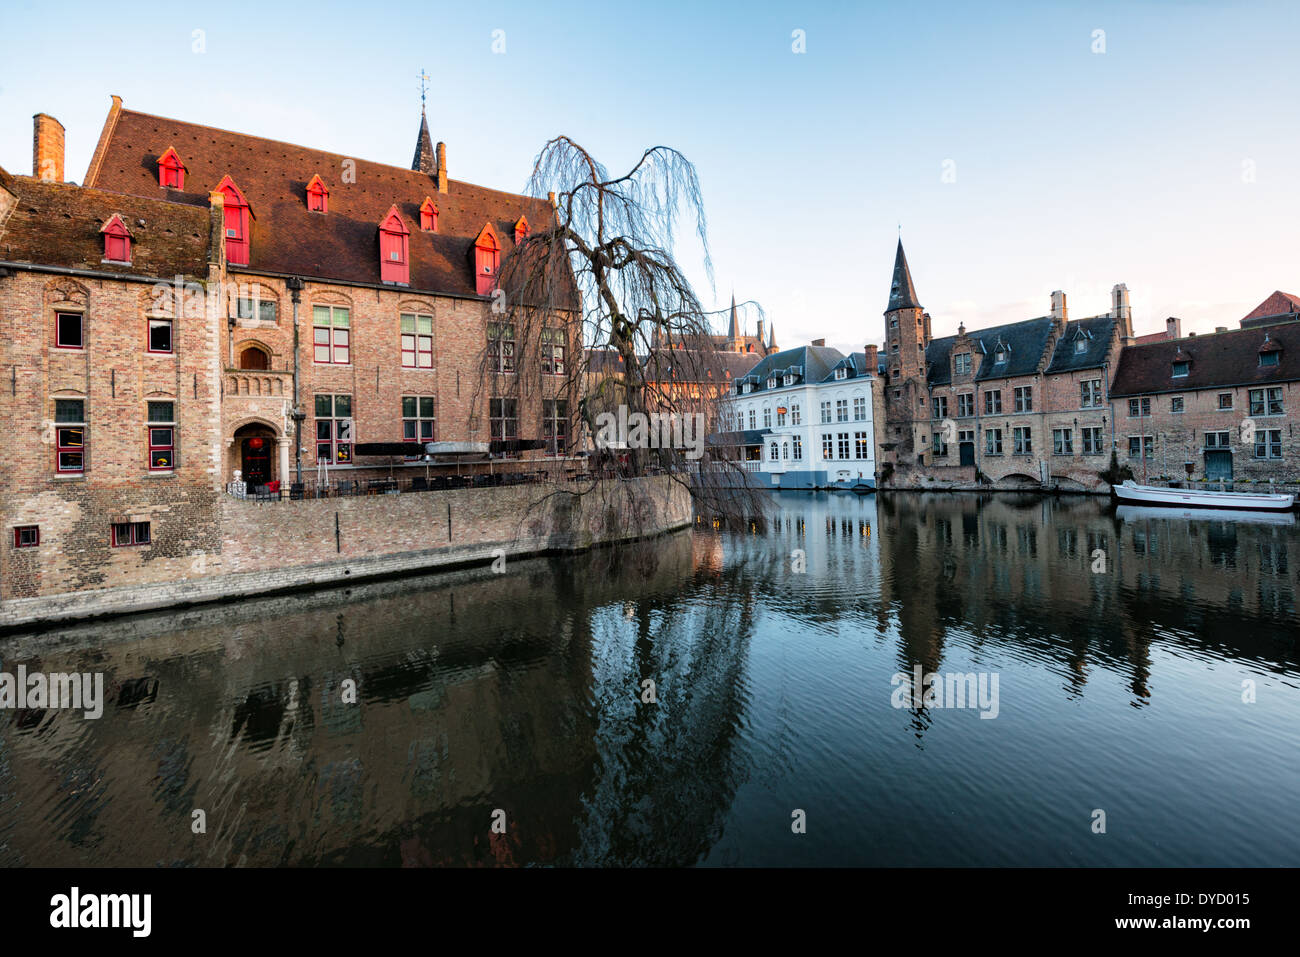 BRUGES, Belgium - Sometimes called 'The Venice of the North,' the historic Flemish city of Bruges has canals running through the old town. Before the water access became silted up, Bruges was a major commercial port. The building in the foreground at left is known as Perez de Malvenda, the 15th century mayor's house. Stock Photo